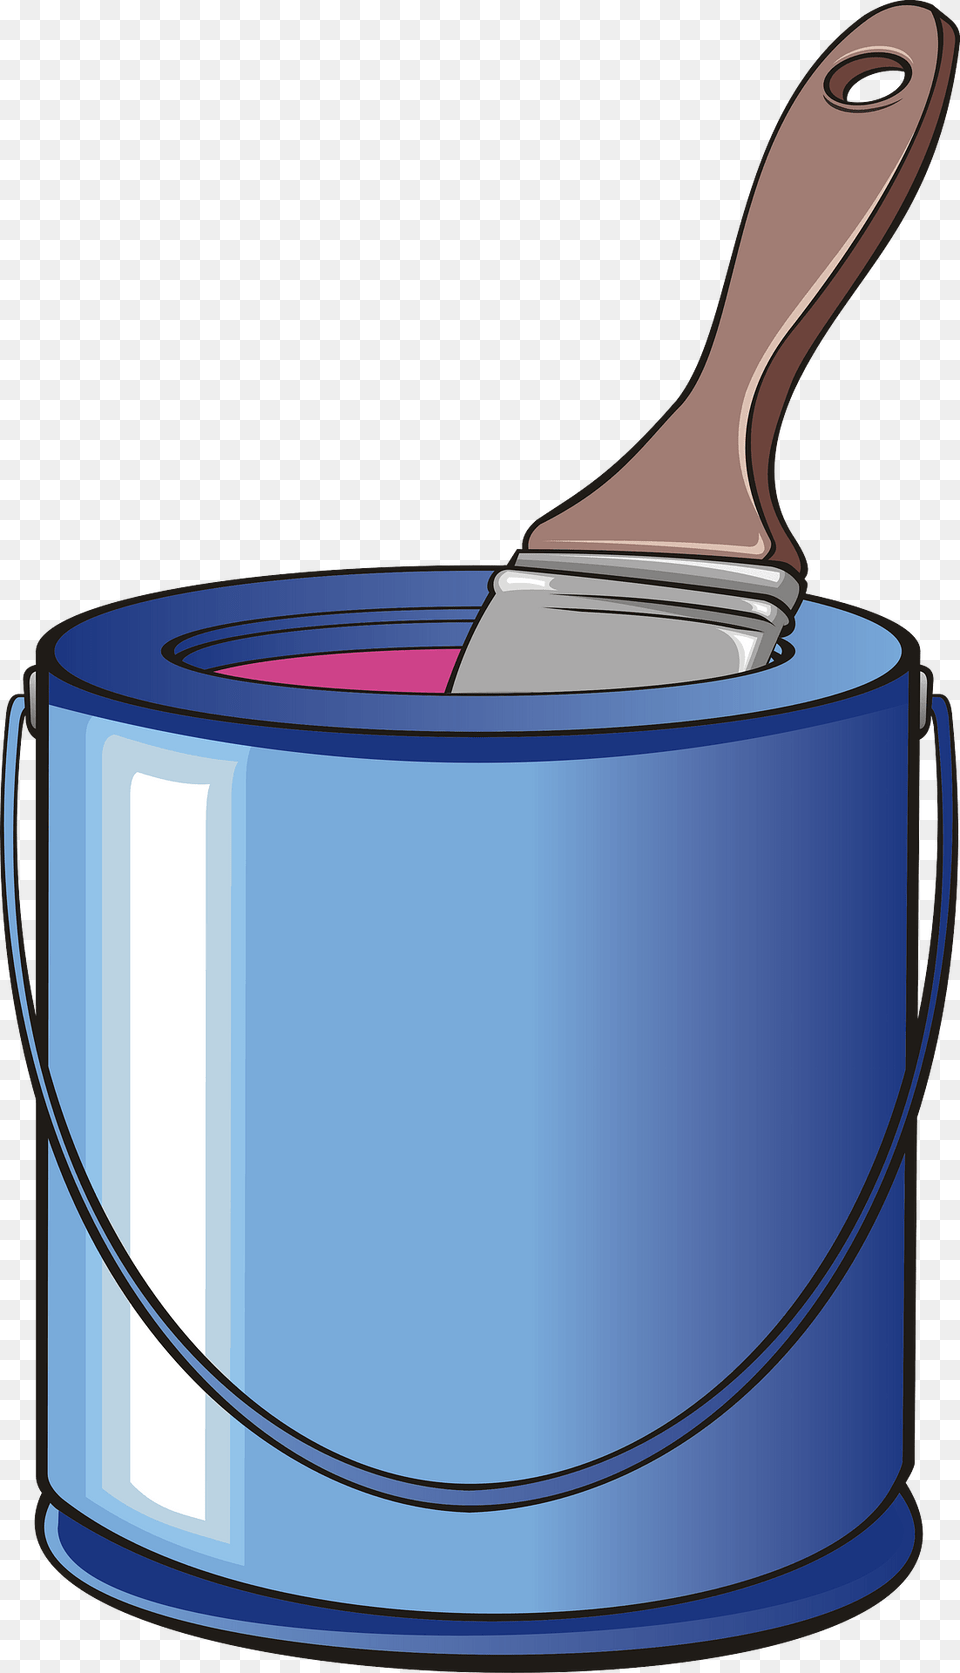 Paint Bucket With Paintbrush Clipart, Smoke Pipe Png